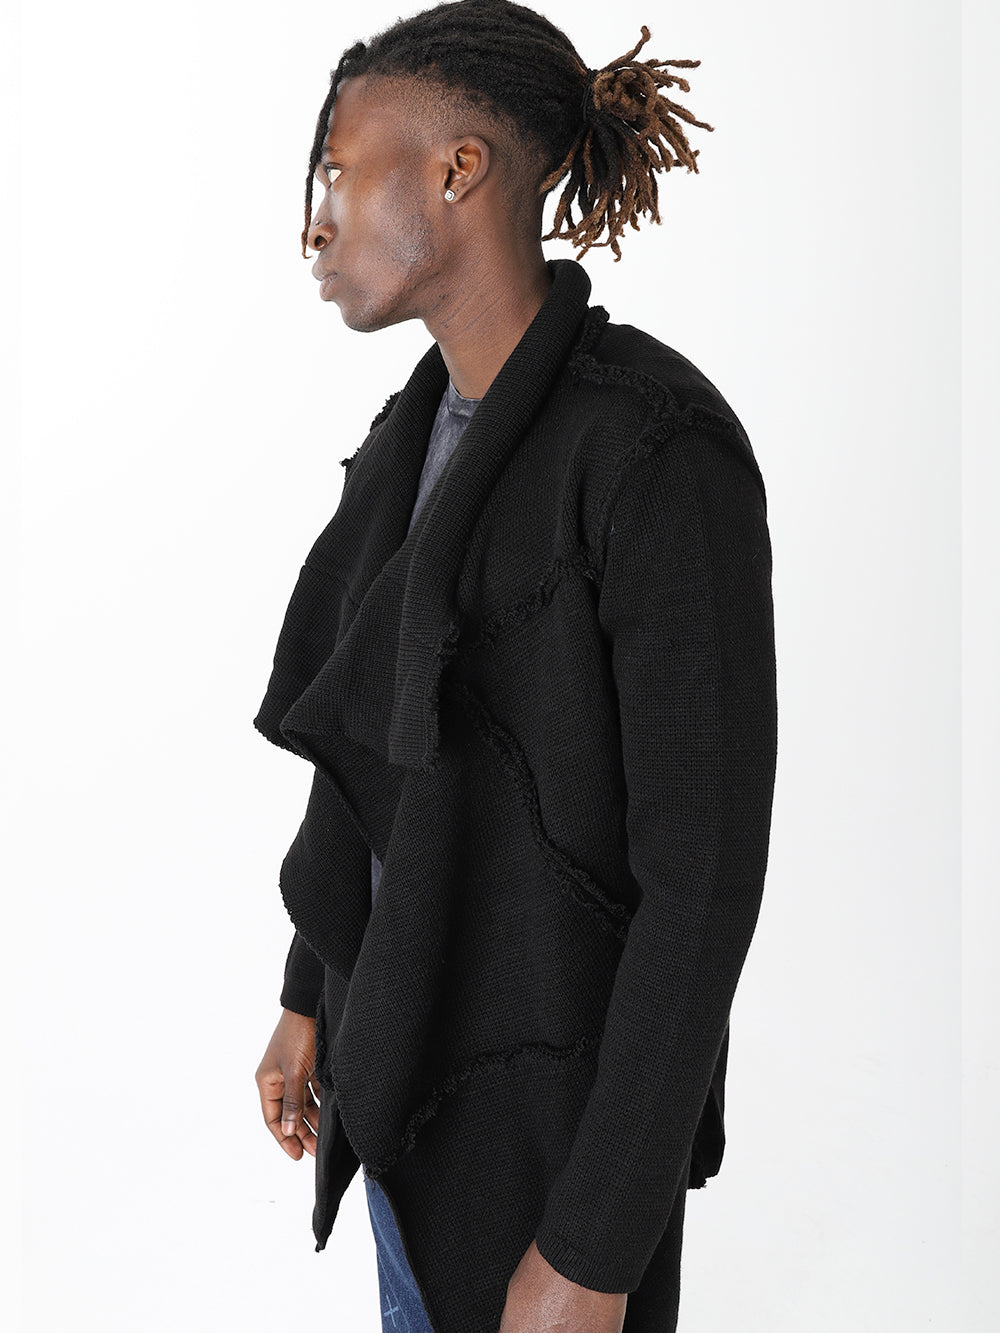 A man with dreadlocks wearing a HOODED DISTRESSED CARDIGAN // BLACK and skinny fit jeans, showcasing mens streetwear fashion.